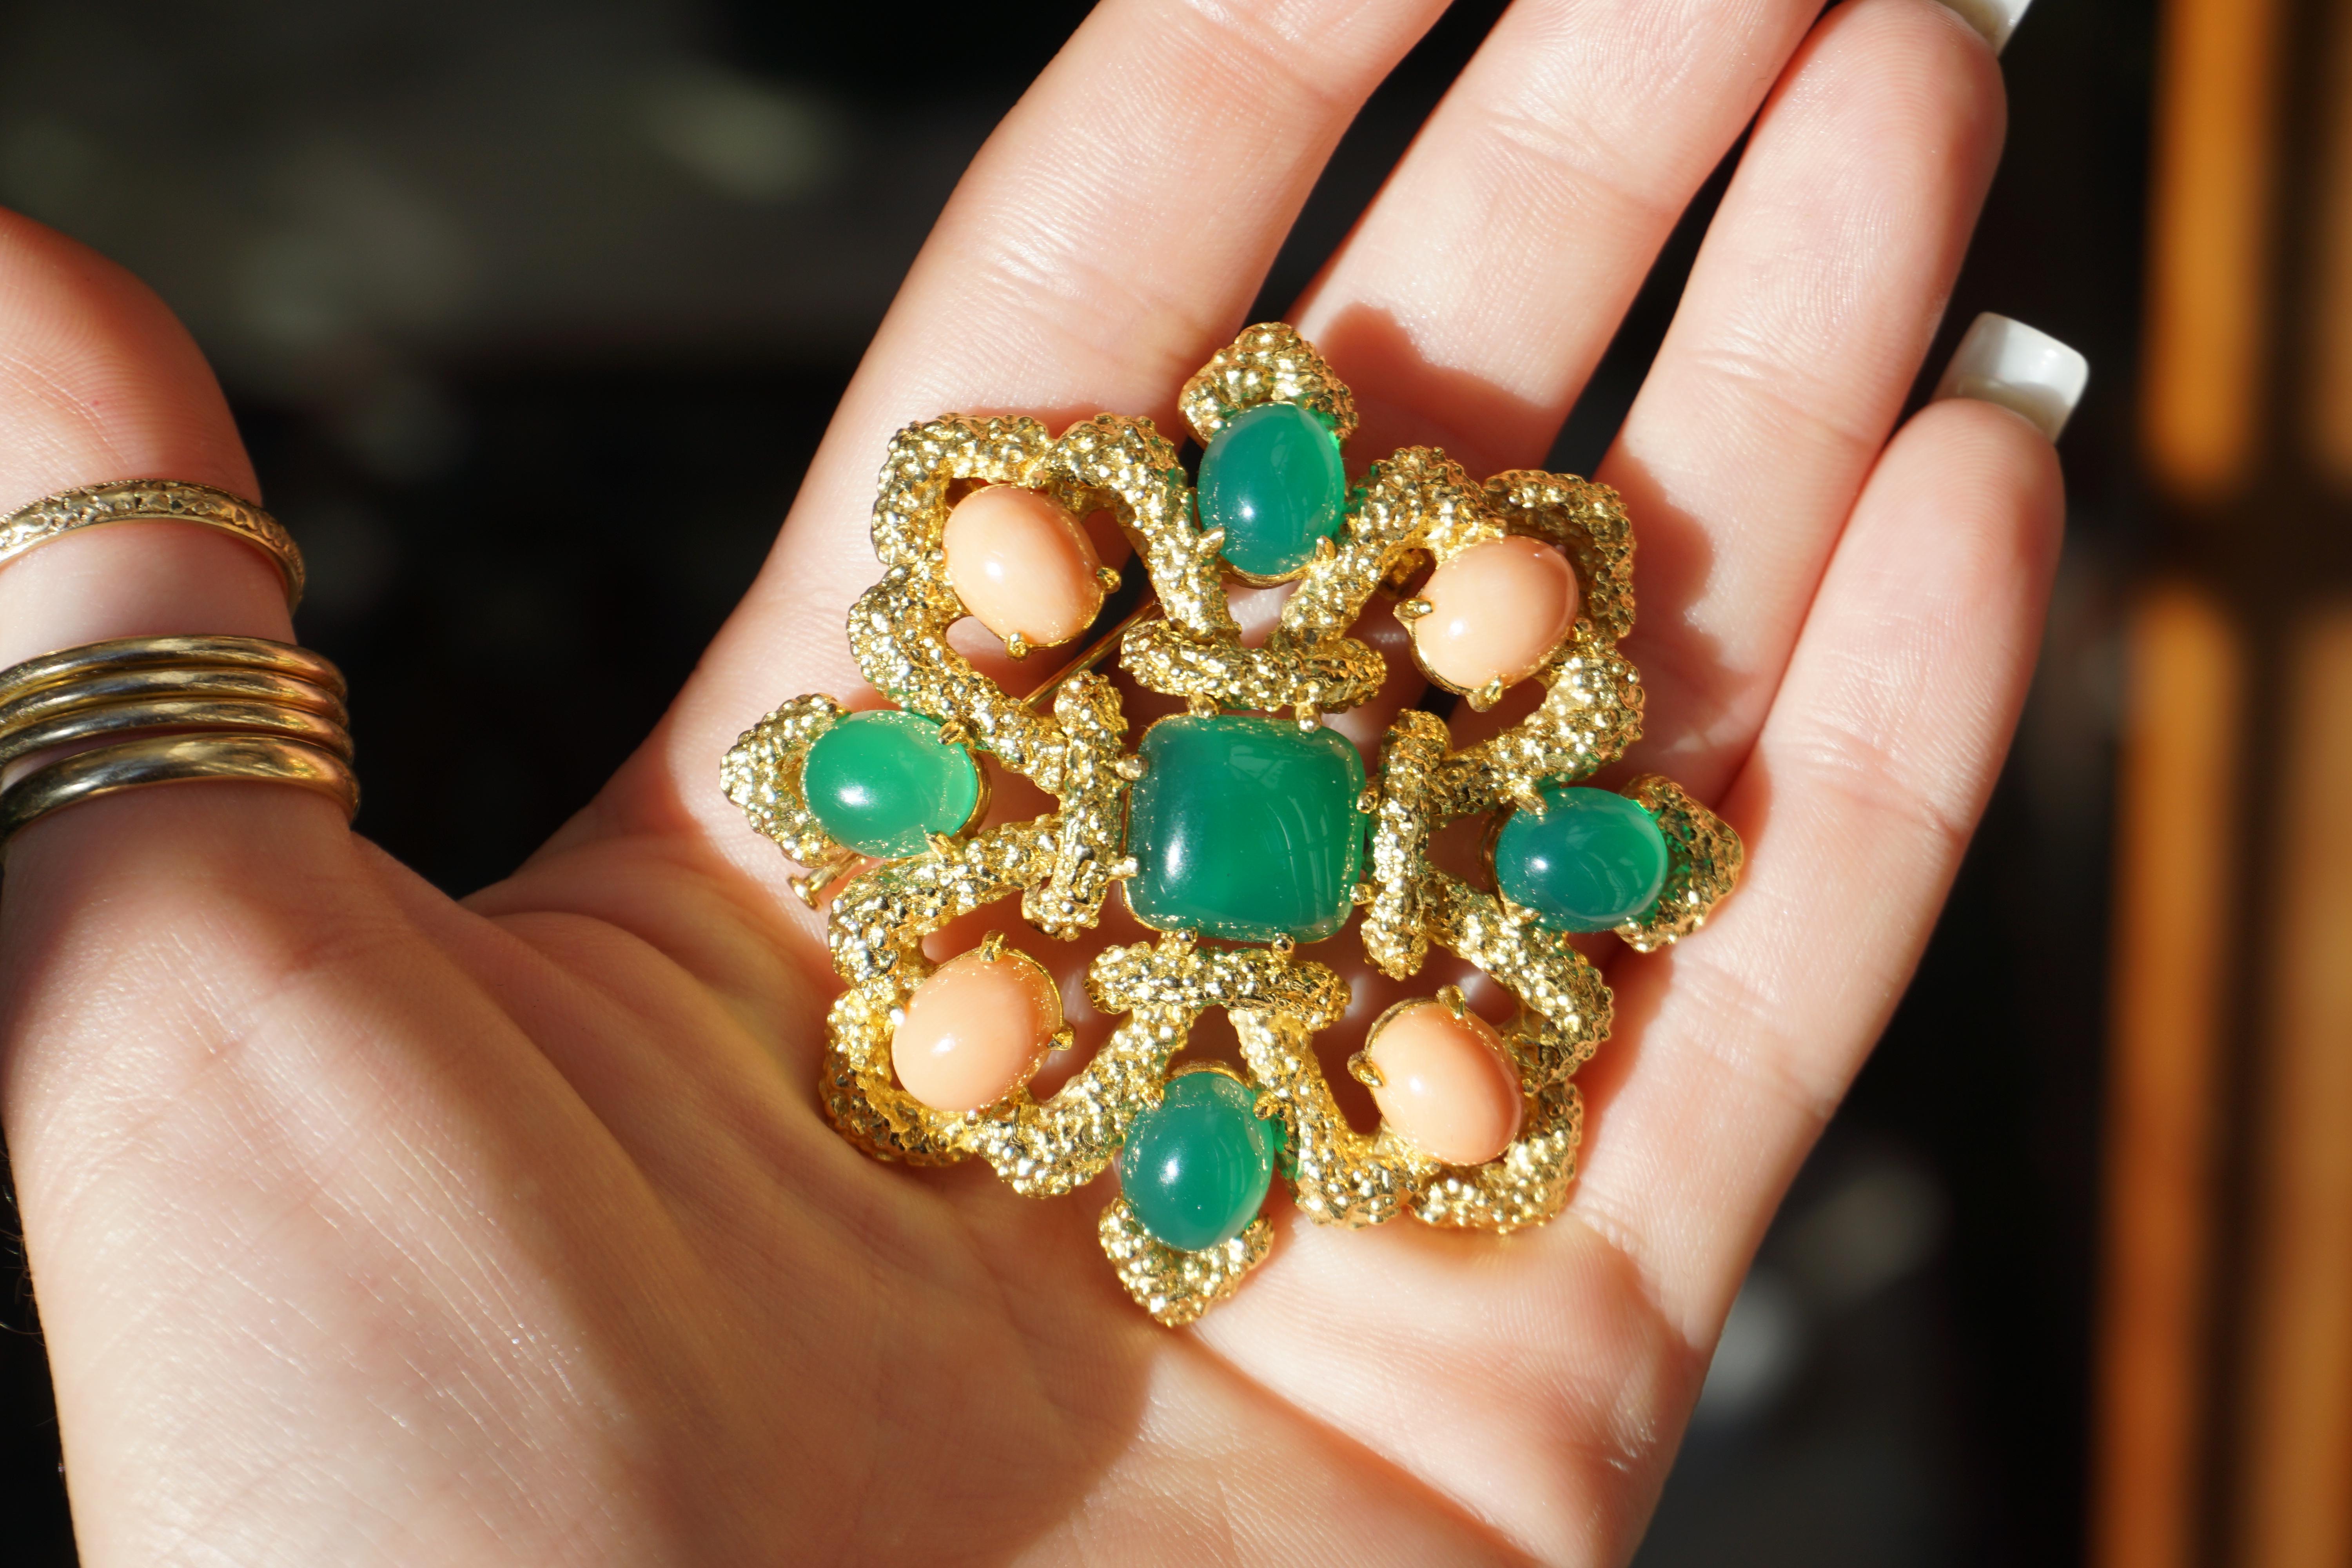 Cabochon Van Cleef & Arpels 18K Gold Chrysoprase and Coral Pendant Brooch For Sale